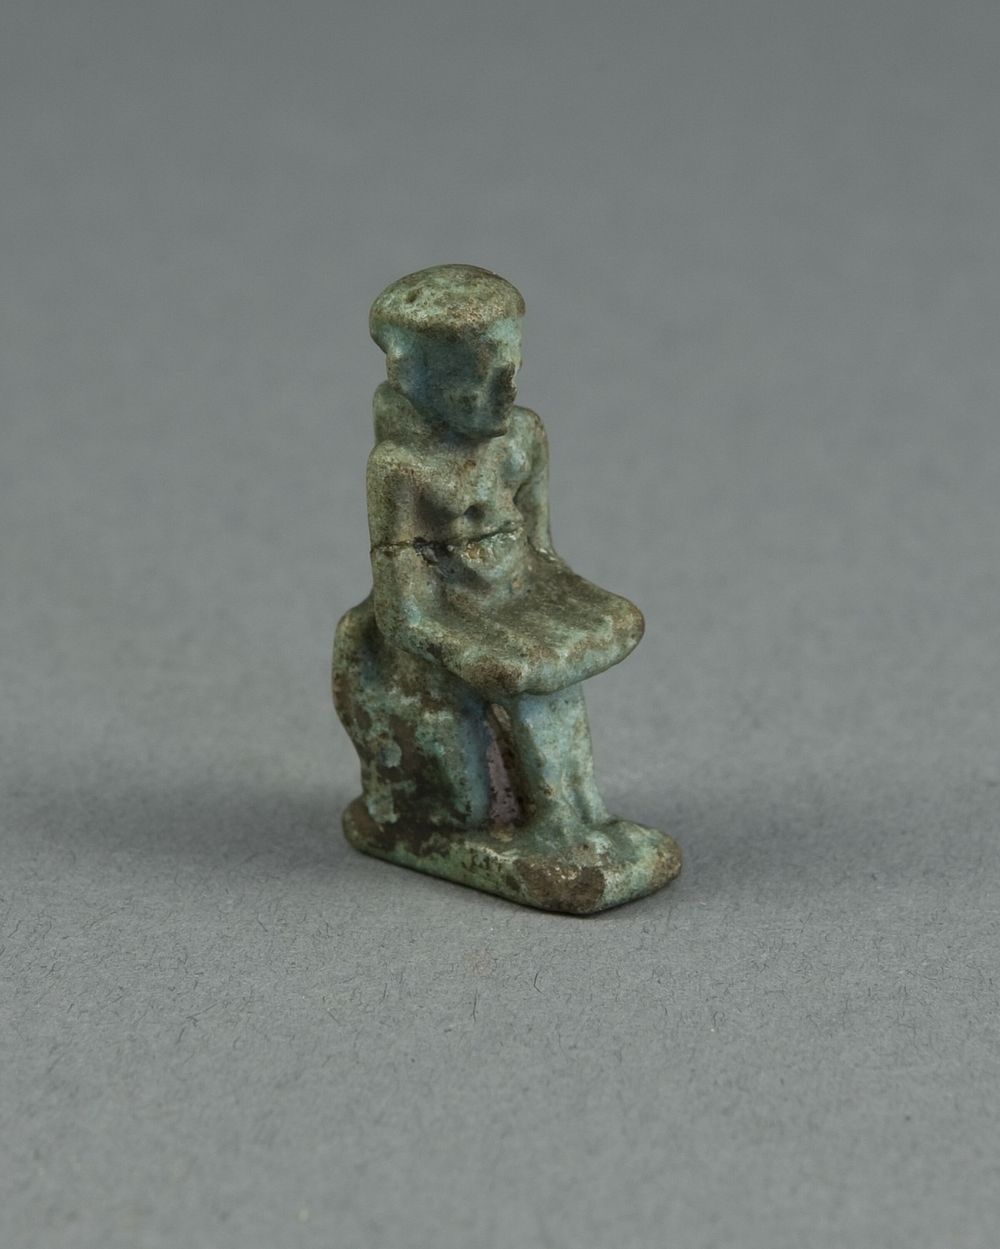 Amulet of the God Imhotep by Ancient Egyptian